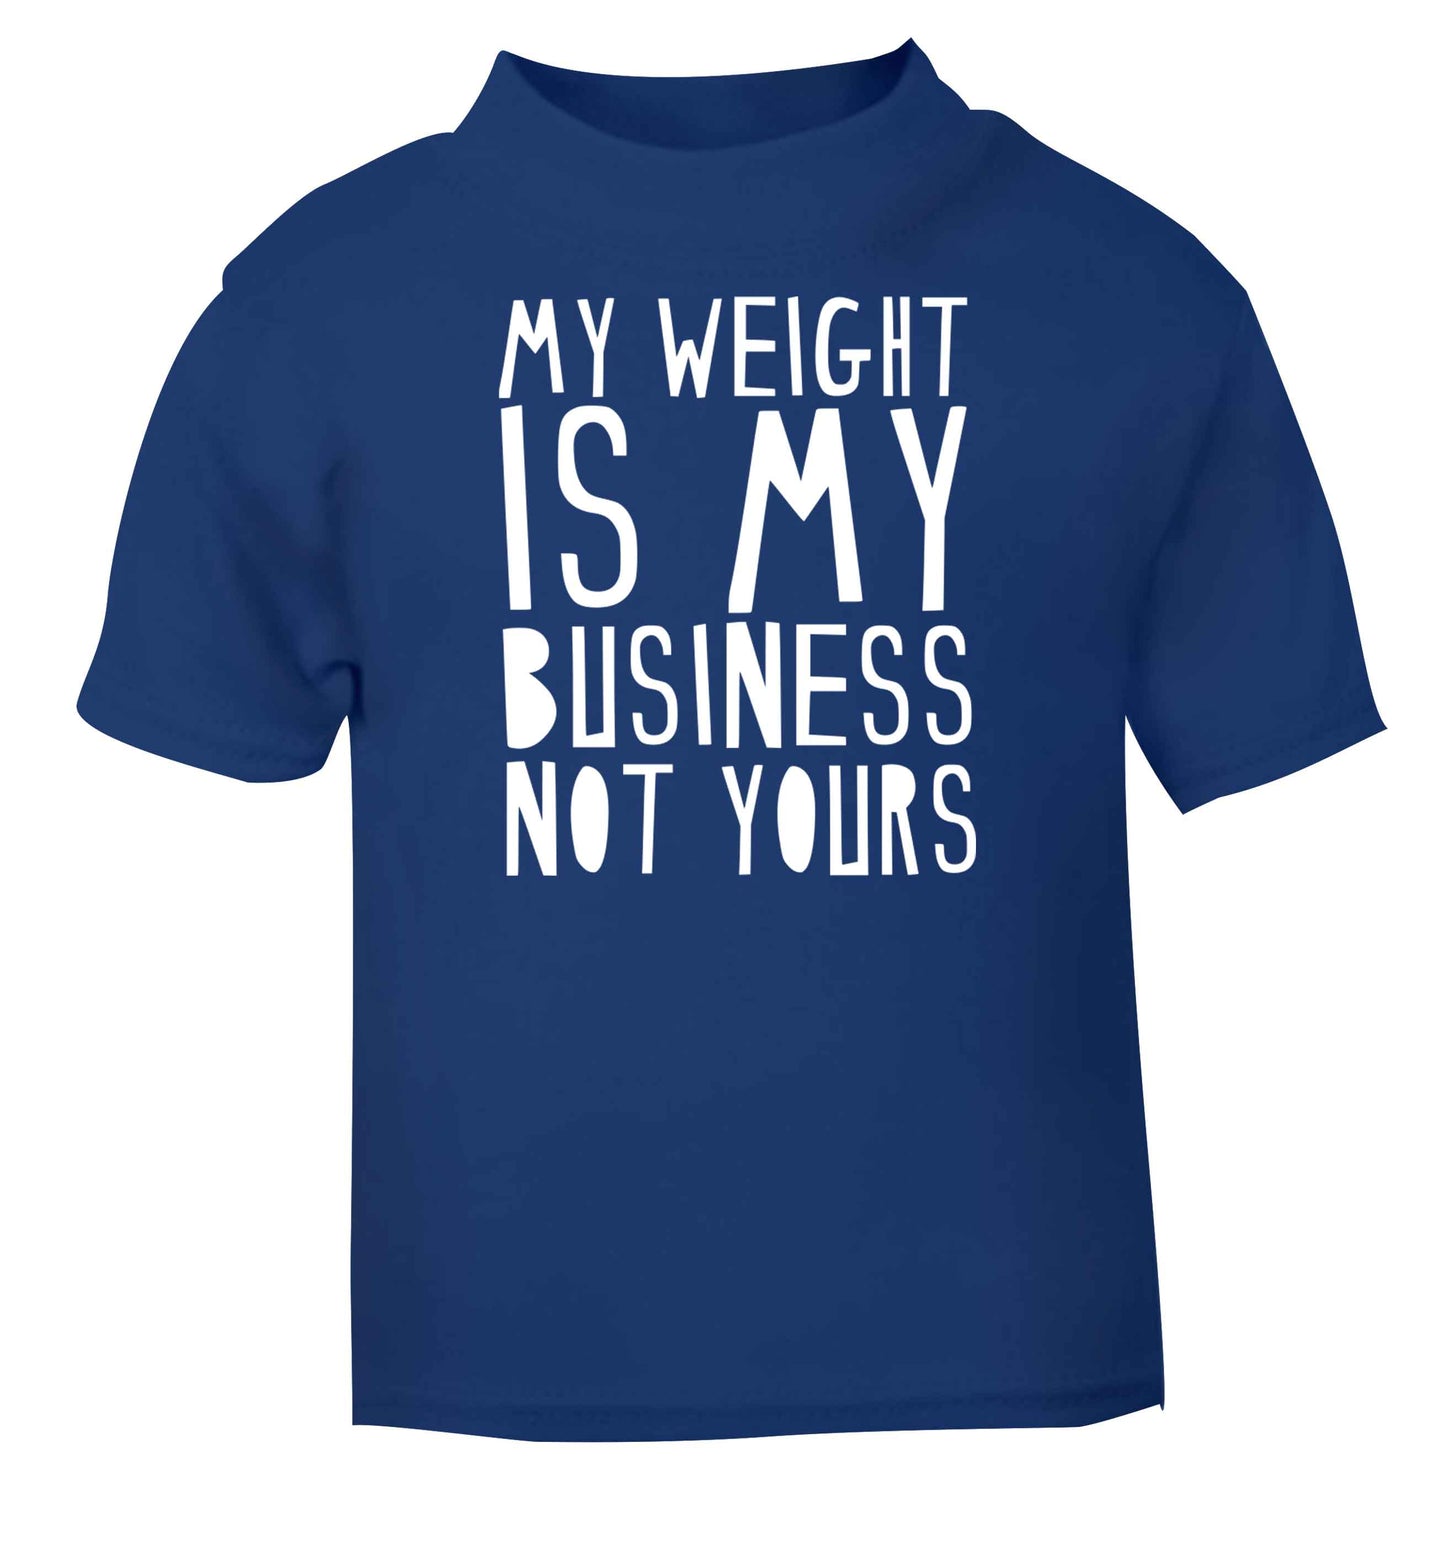 My weight is my business not yours blue baby toddler Tshirt 2 Years